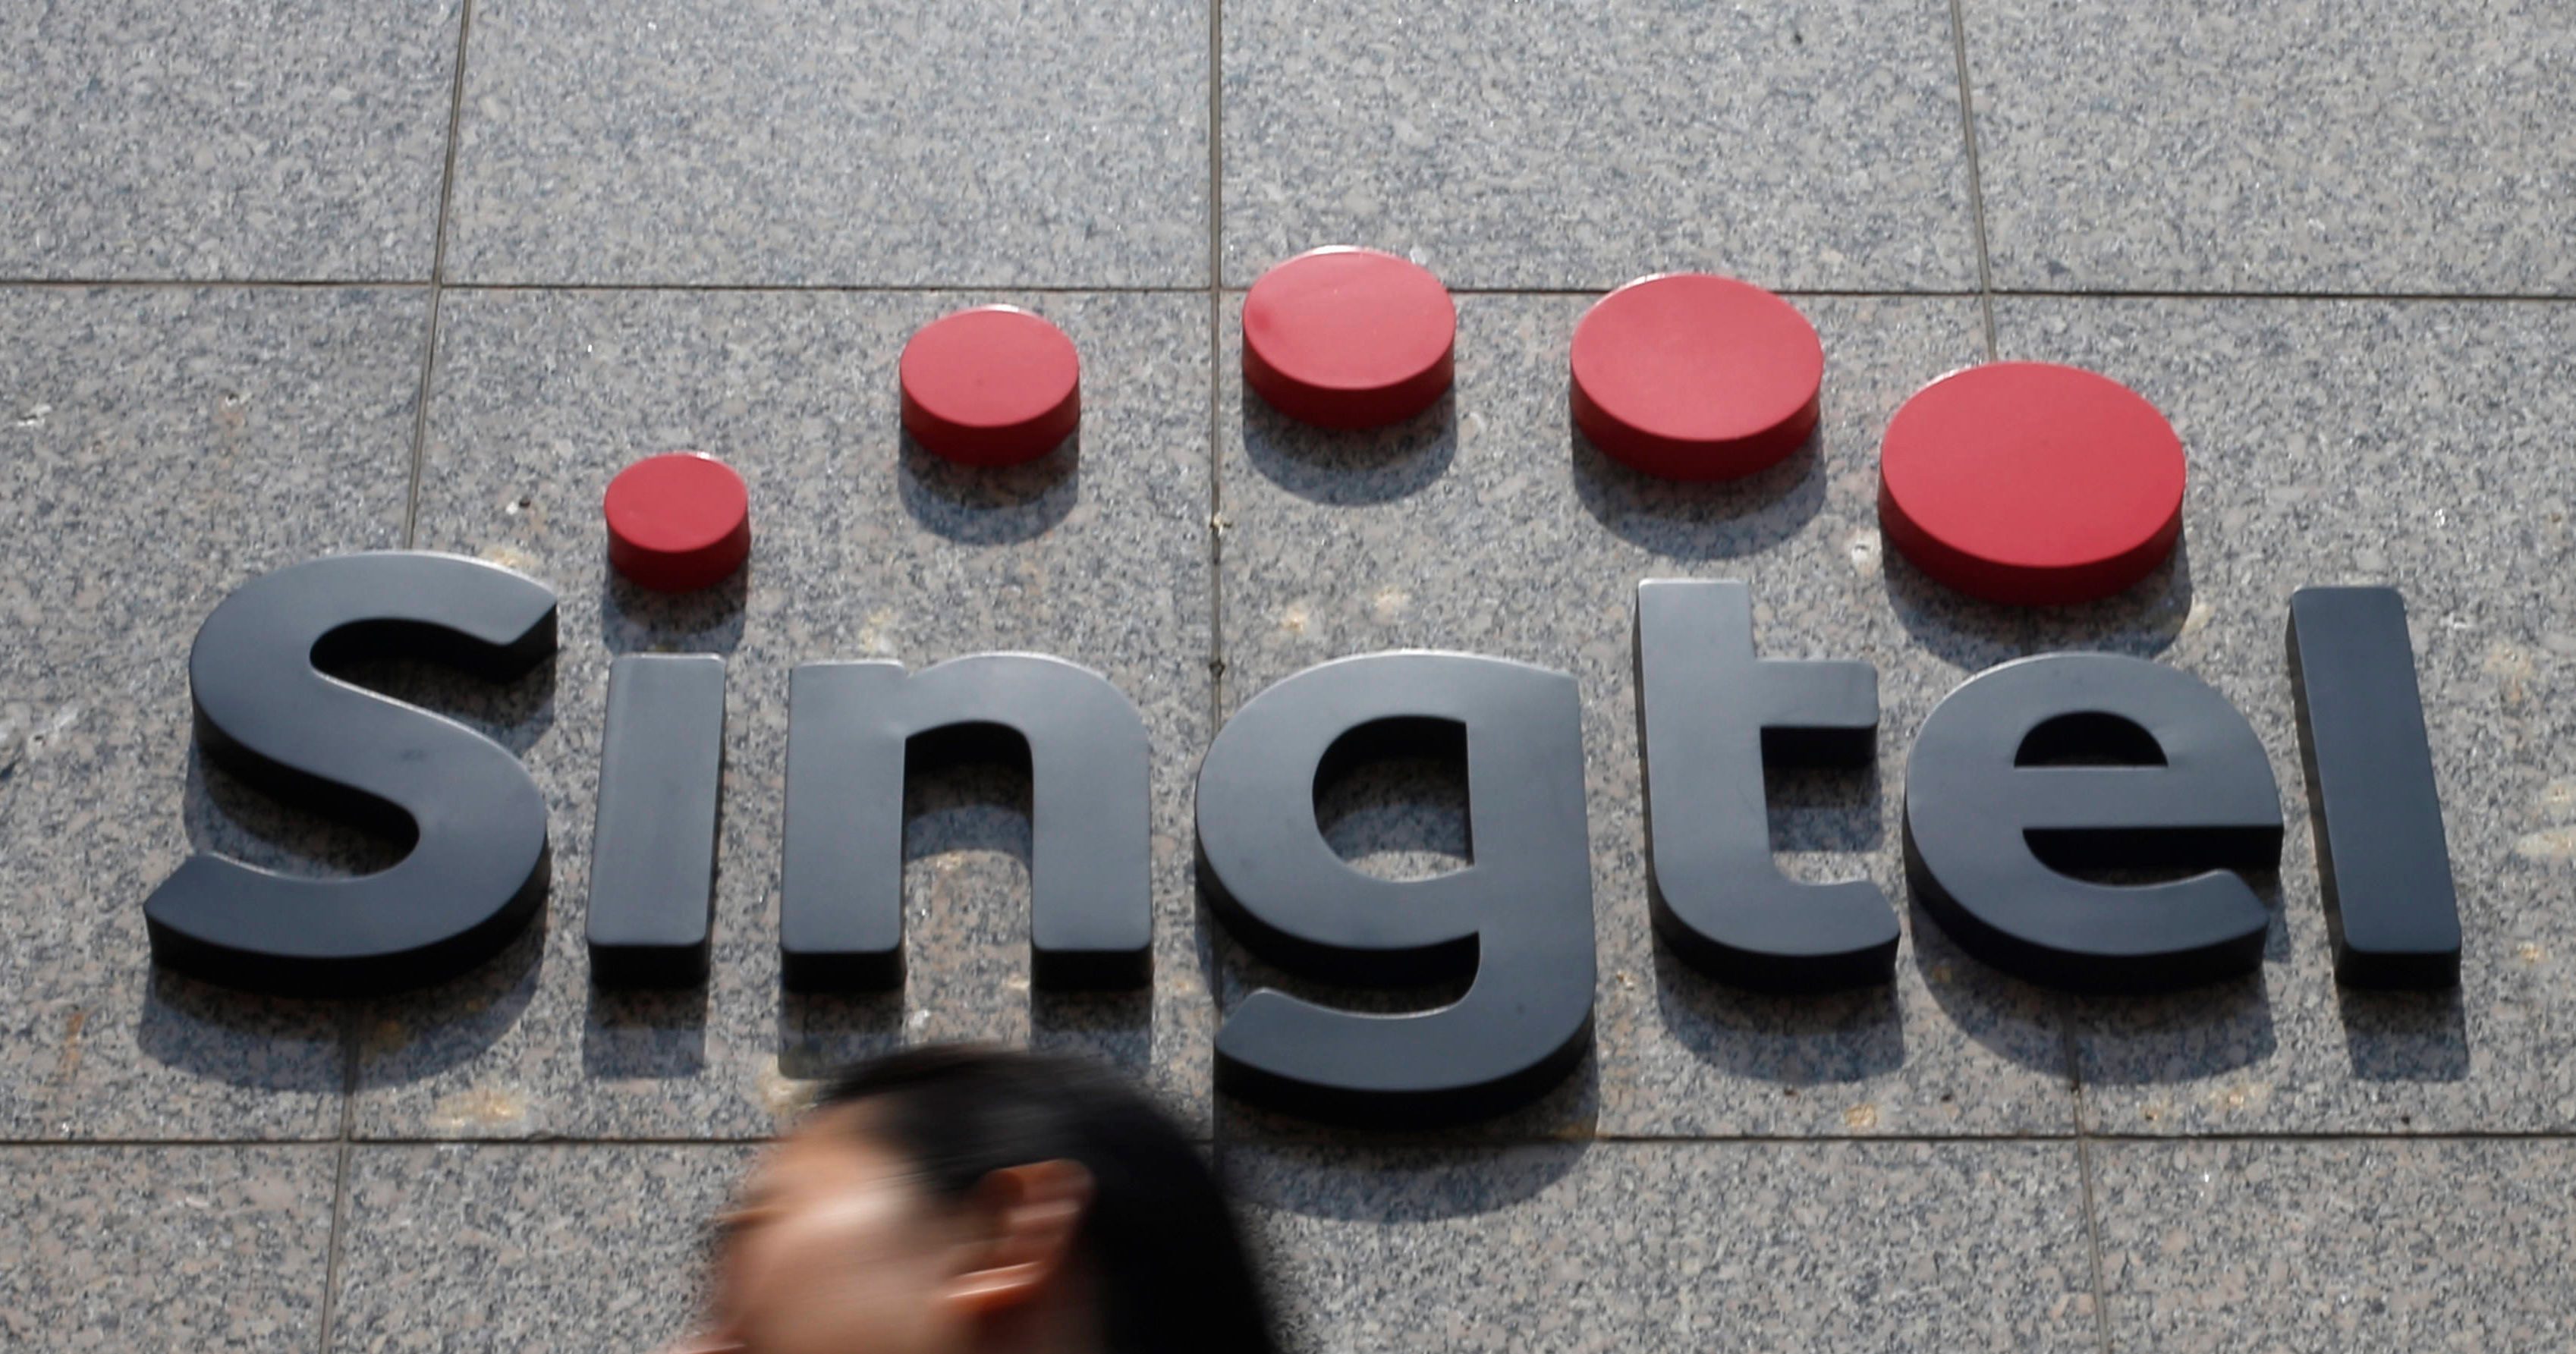 KKR commits close to $807m for 20% stake in Singtel's data centre unit